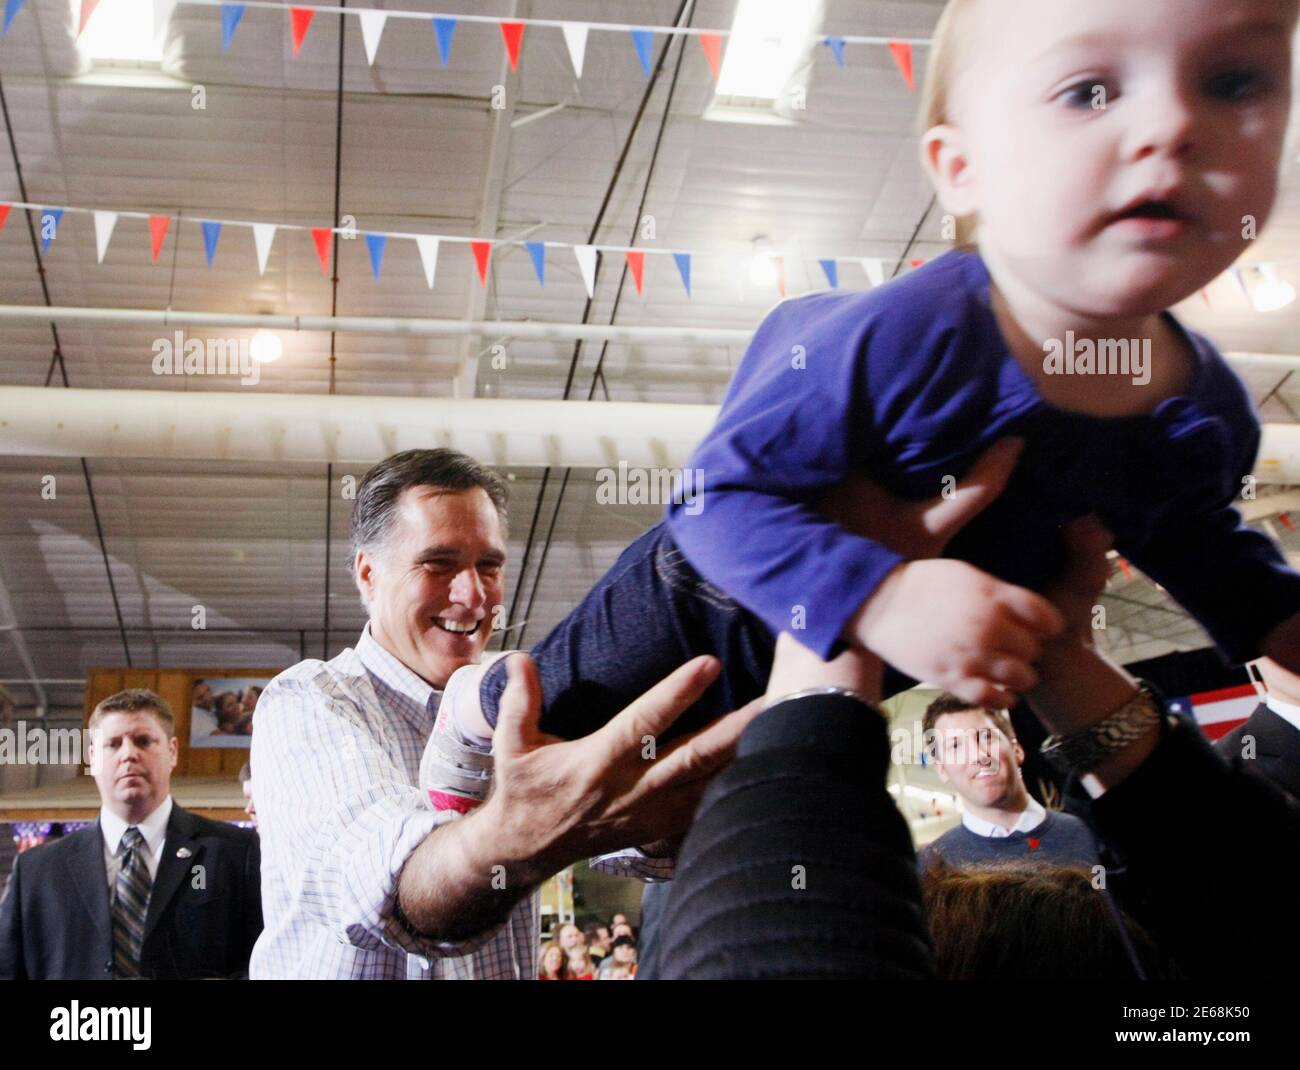 Republican presidential candidate Mitt Romney hands Madison Busch, 1, to her mother after a campaign event at an RV dealer in Loveland, Colorado February 7, 2012. The Colorado caucuses take place today. REUTERS/Rick Wilking (UNITED STATES - Tags: POLITICS) Stock Photo